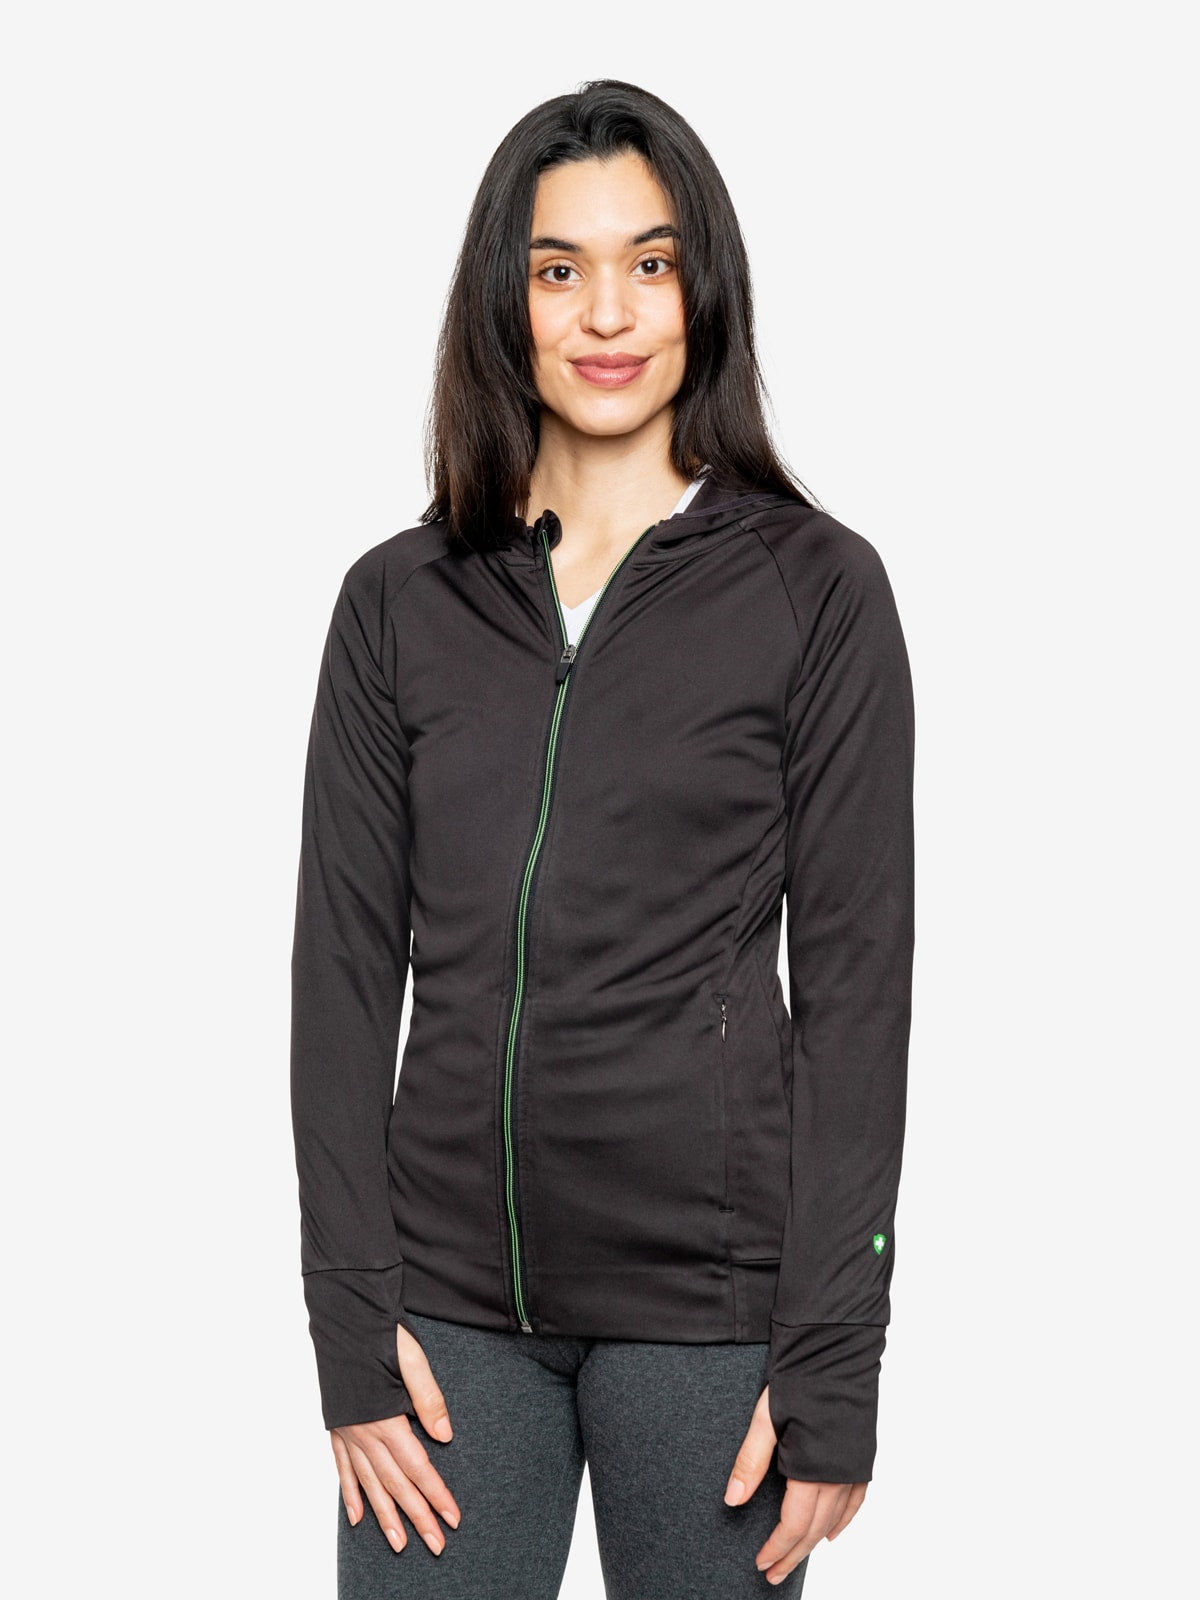 Insect Shield Women's Tech Hoodie | Size Small | Grey Heather | 100% Polyester